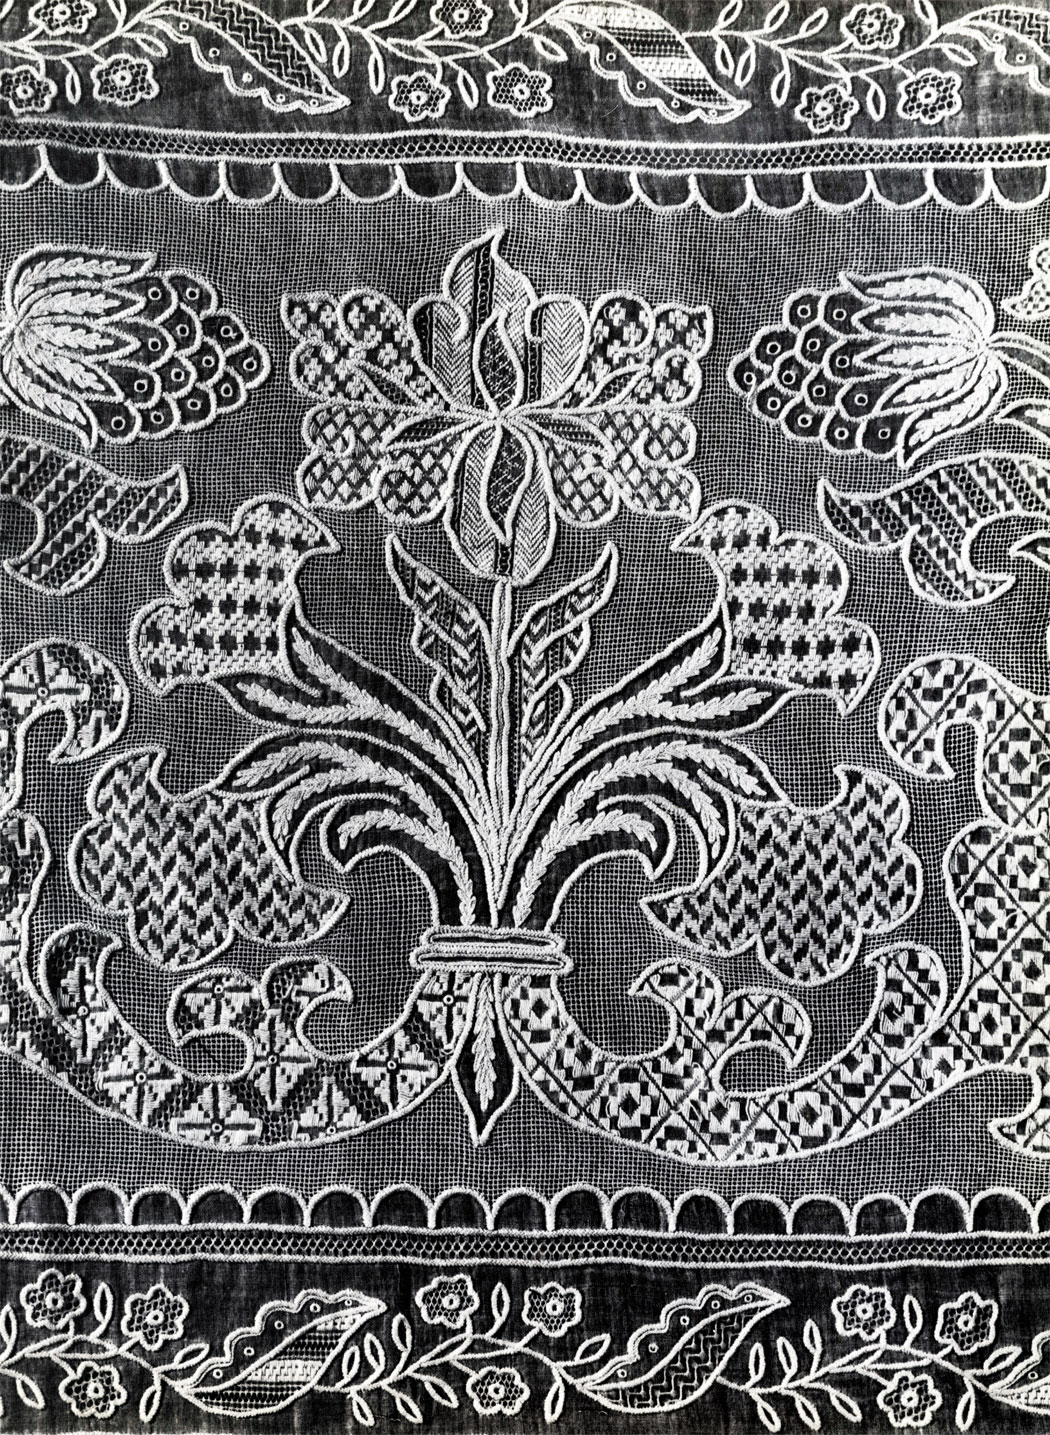 Detail of the valance